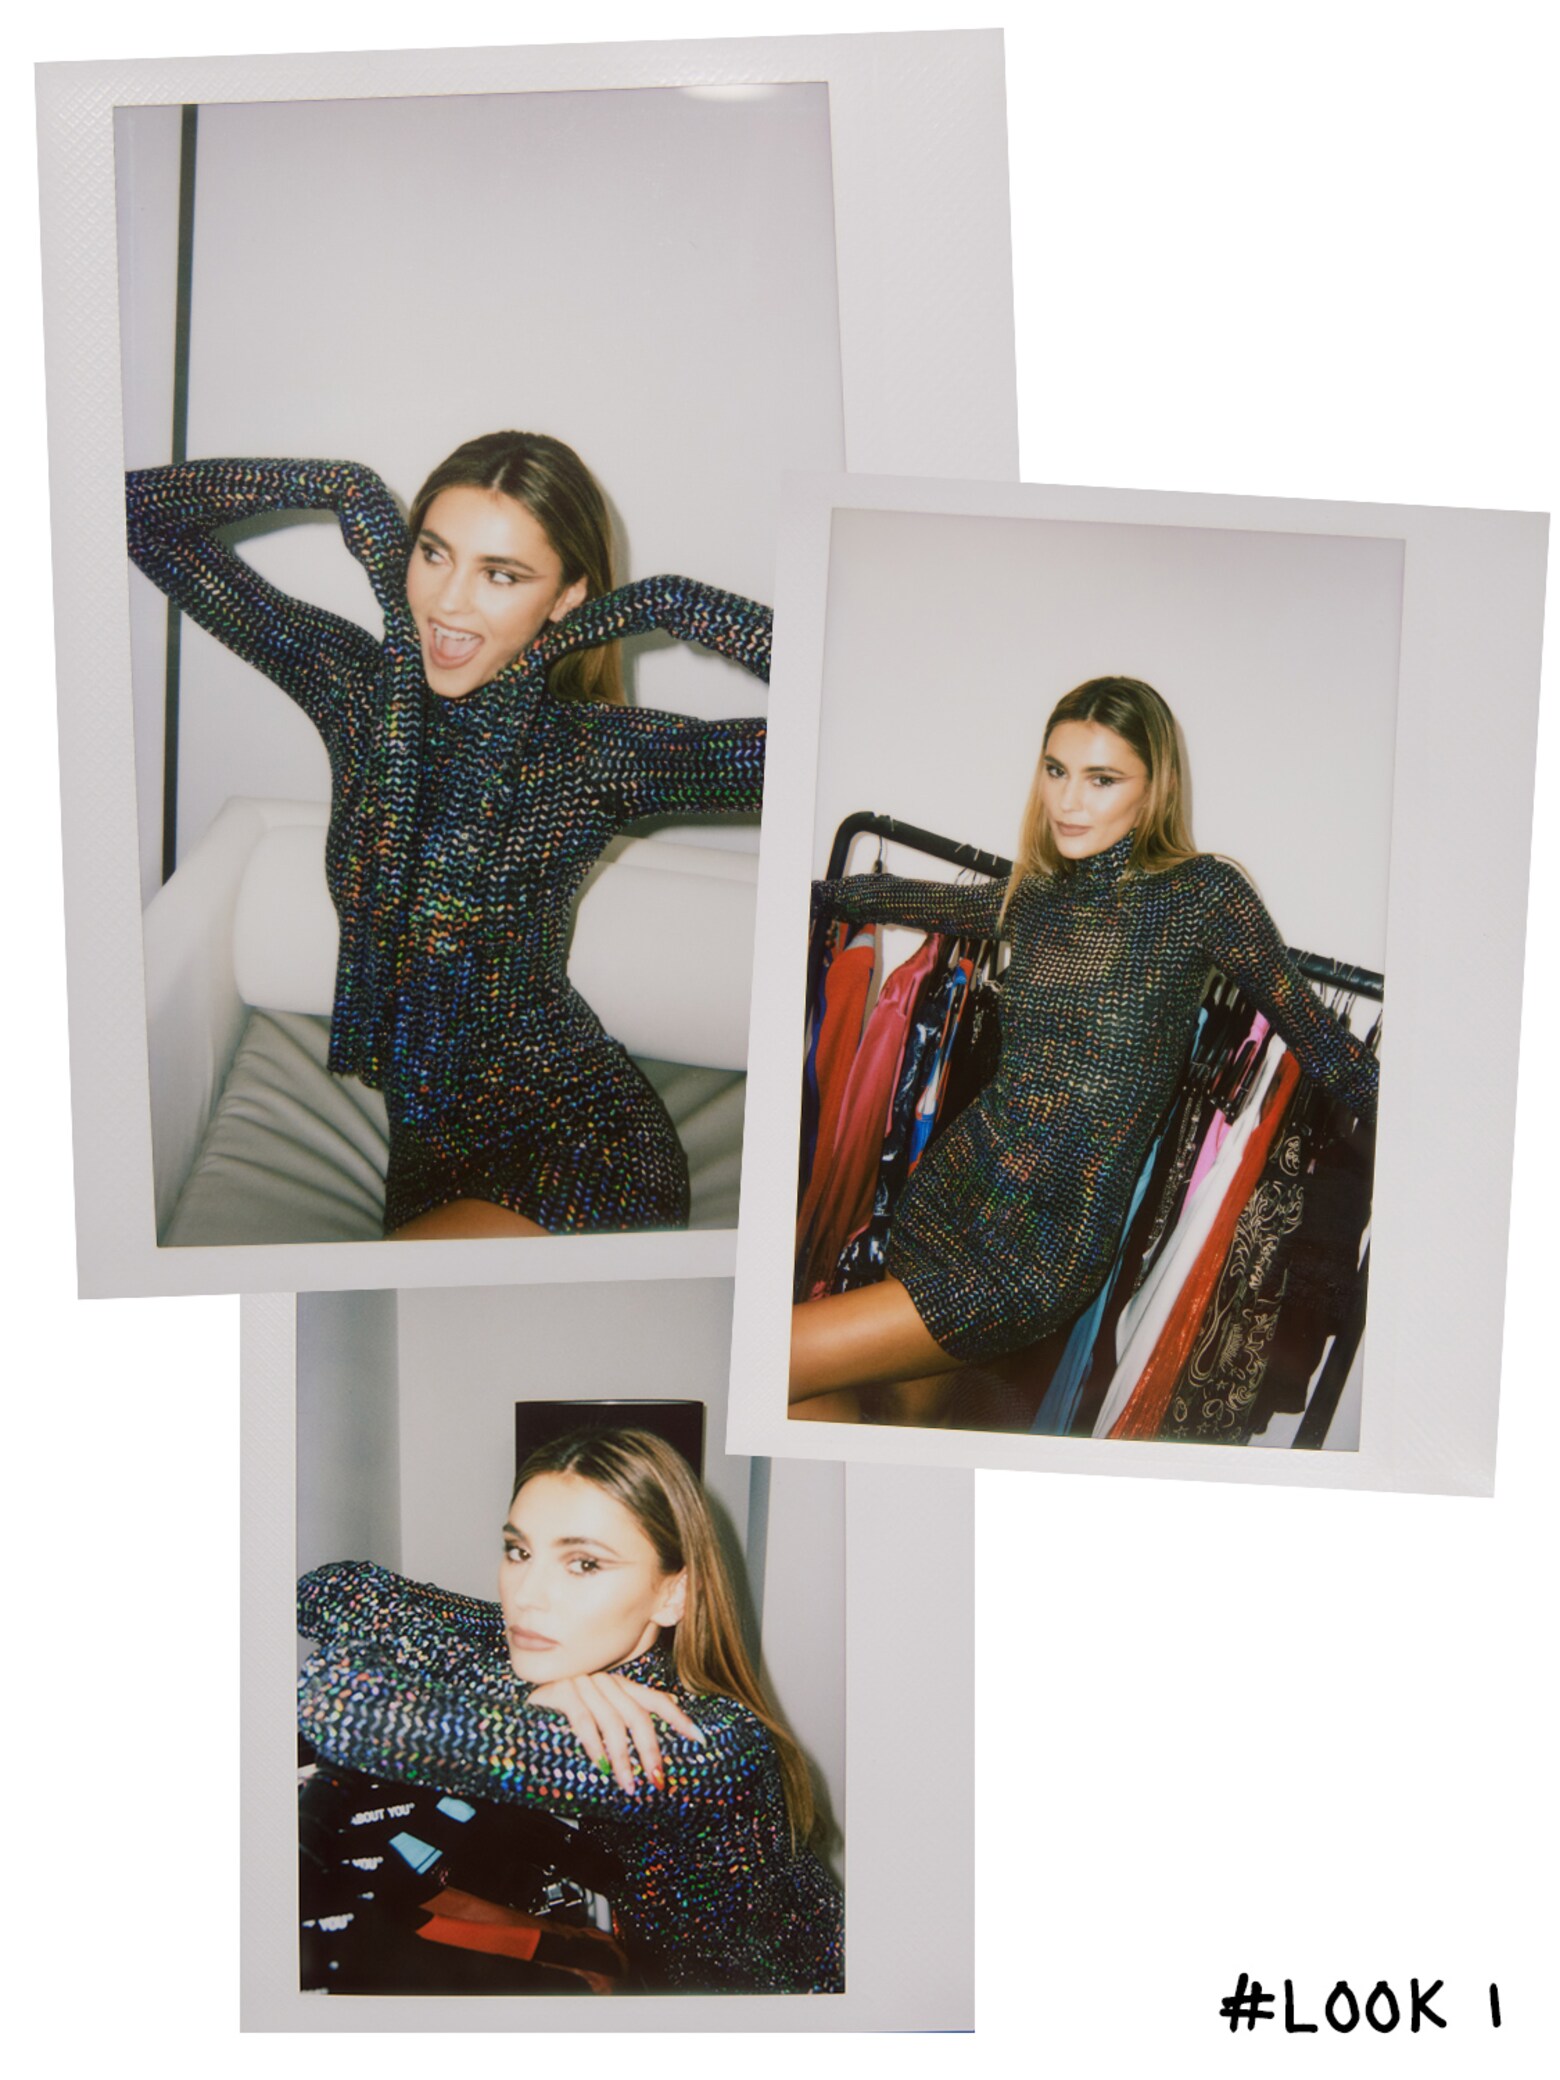 Get Ready with Stefanie Giesinger Spectacular glam looks